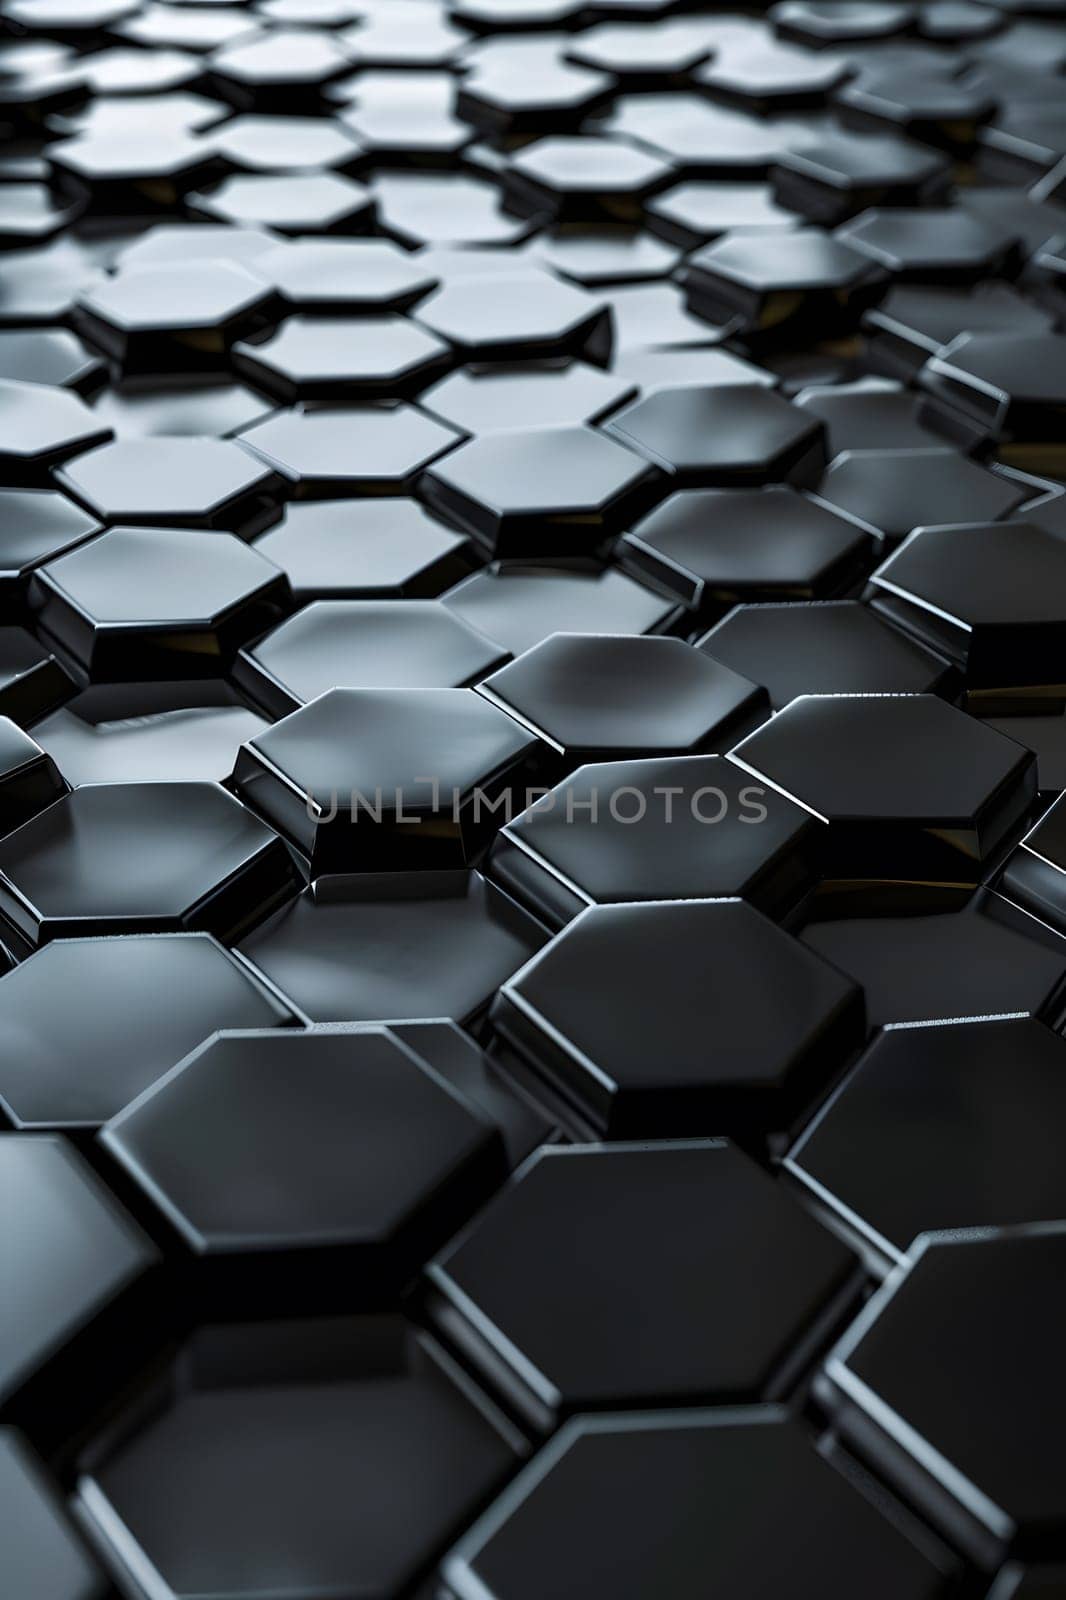 A closeup shot of a black hexagon pattern on a metallic surface by Nadtochiy